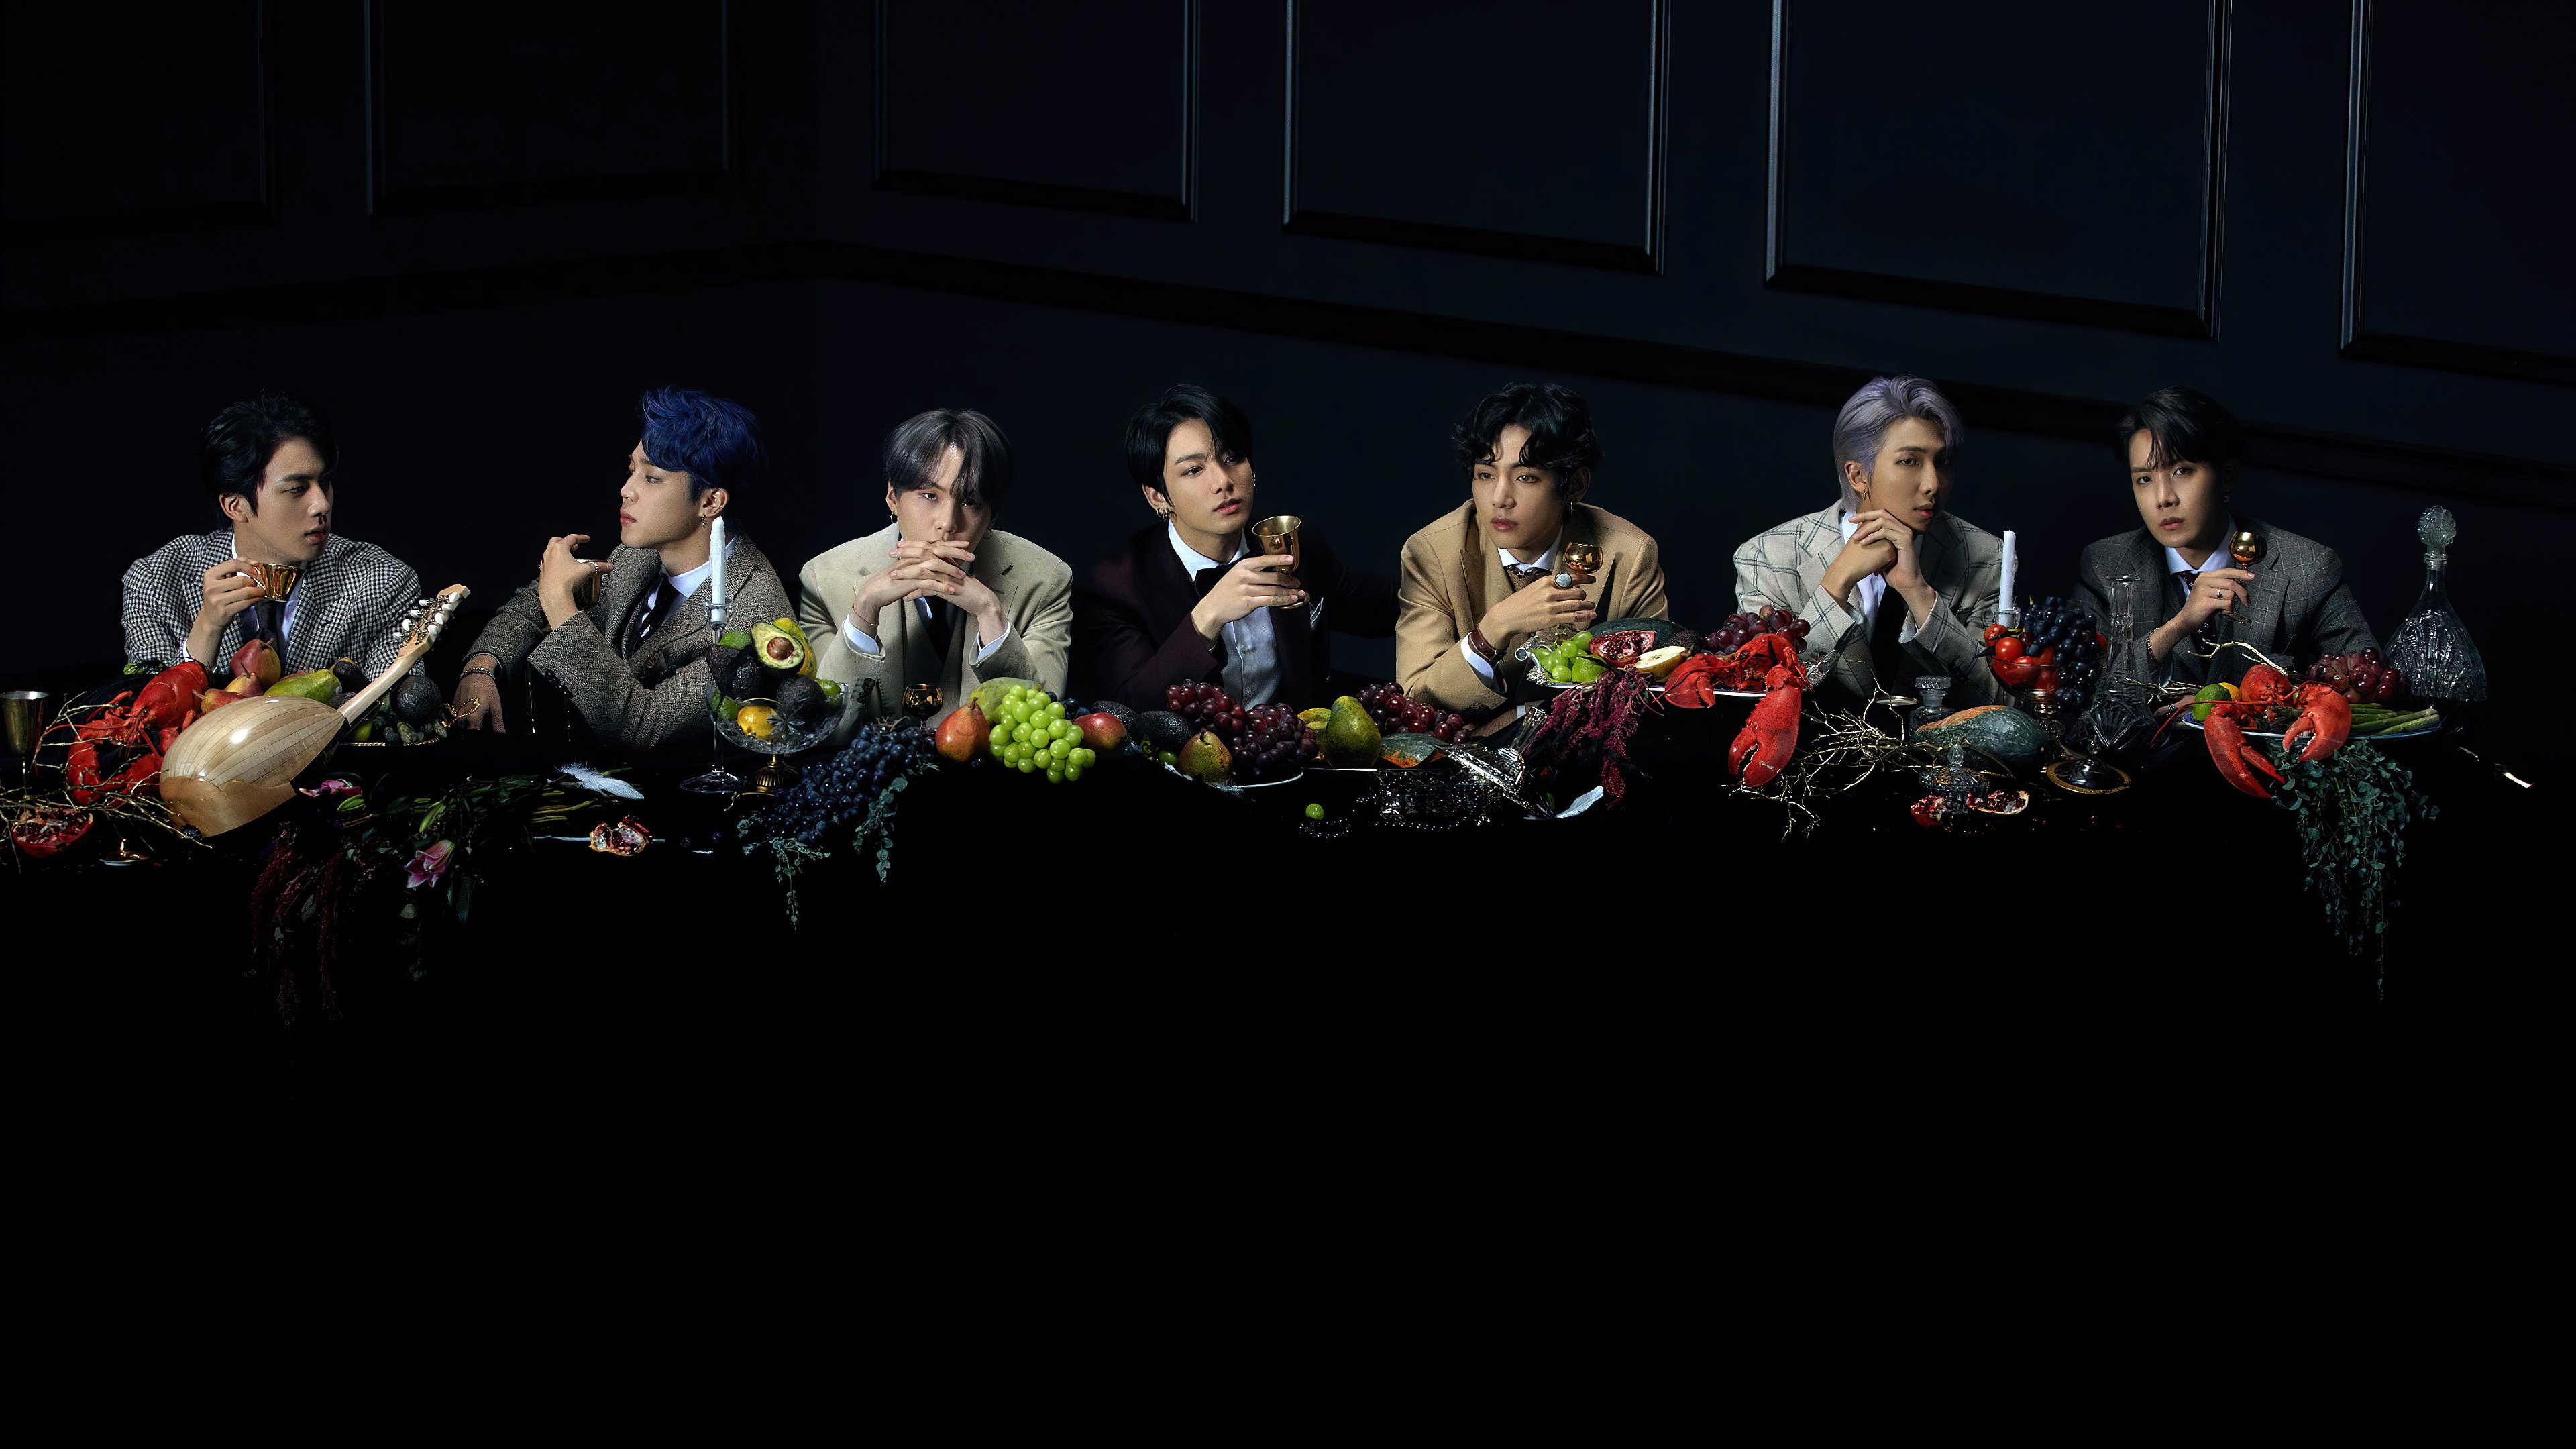 BTS group photo Map of the soul 7 Wallpaper 4k Ultra HD ID:9465